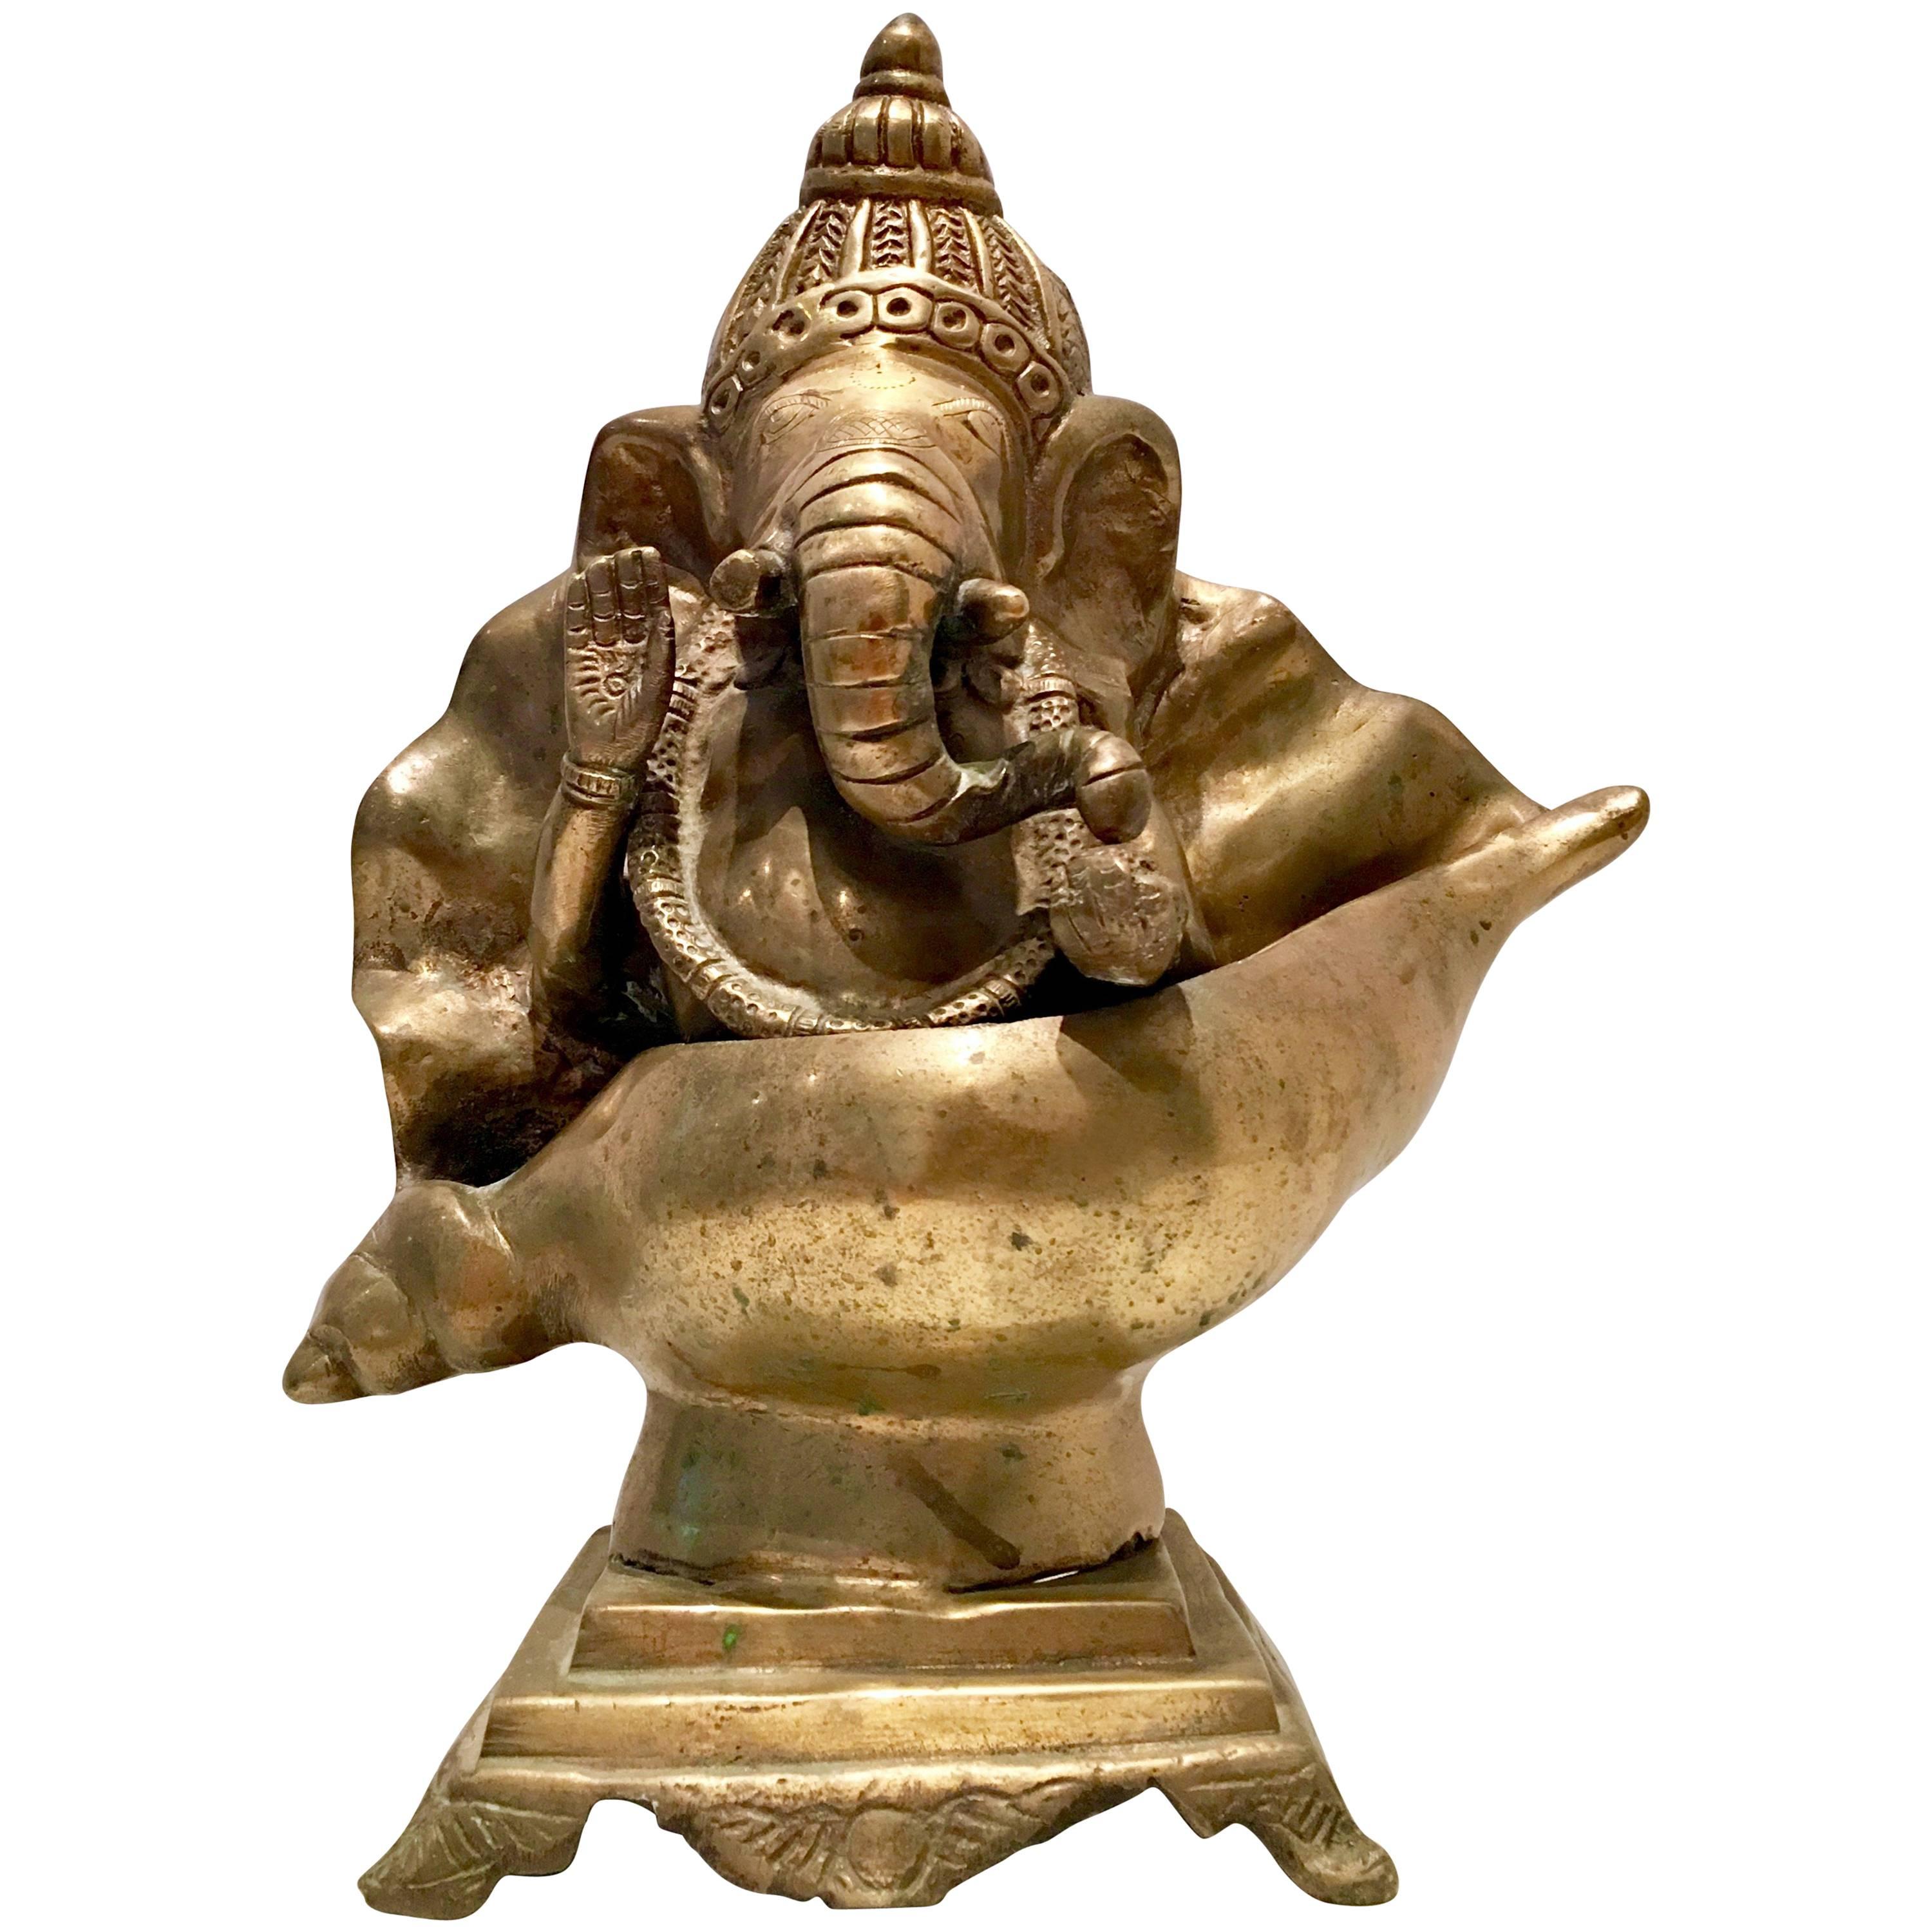 20th Century Solid Brass "Good Luck" Elephant Buddha In A Shell Sculpture